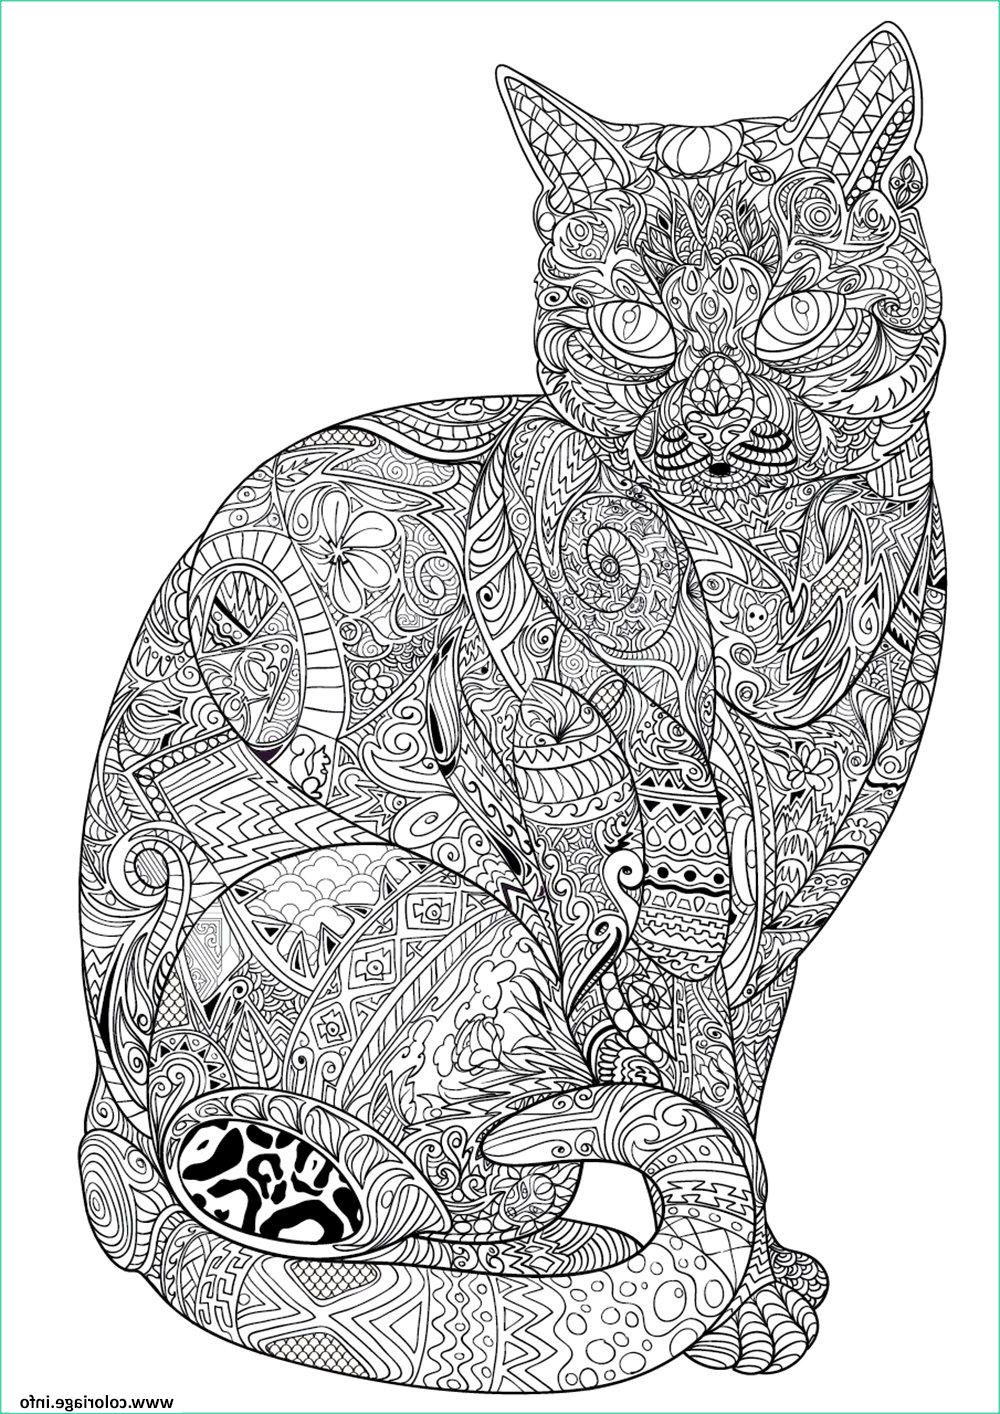 Coloriage Anti-stress Impressionnant Photos Coloriage Chat Adulte Difficile Antistress Animaux Dessin